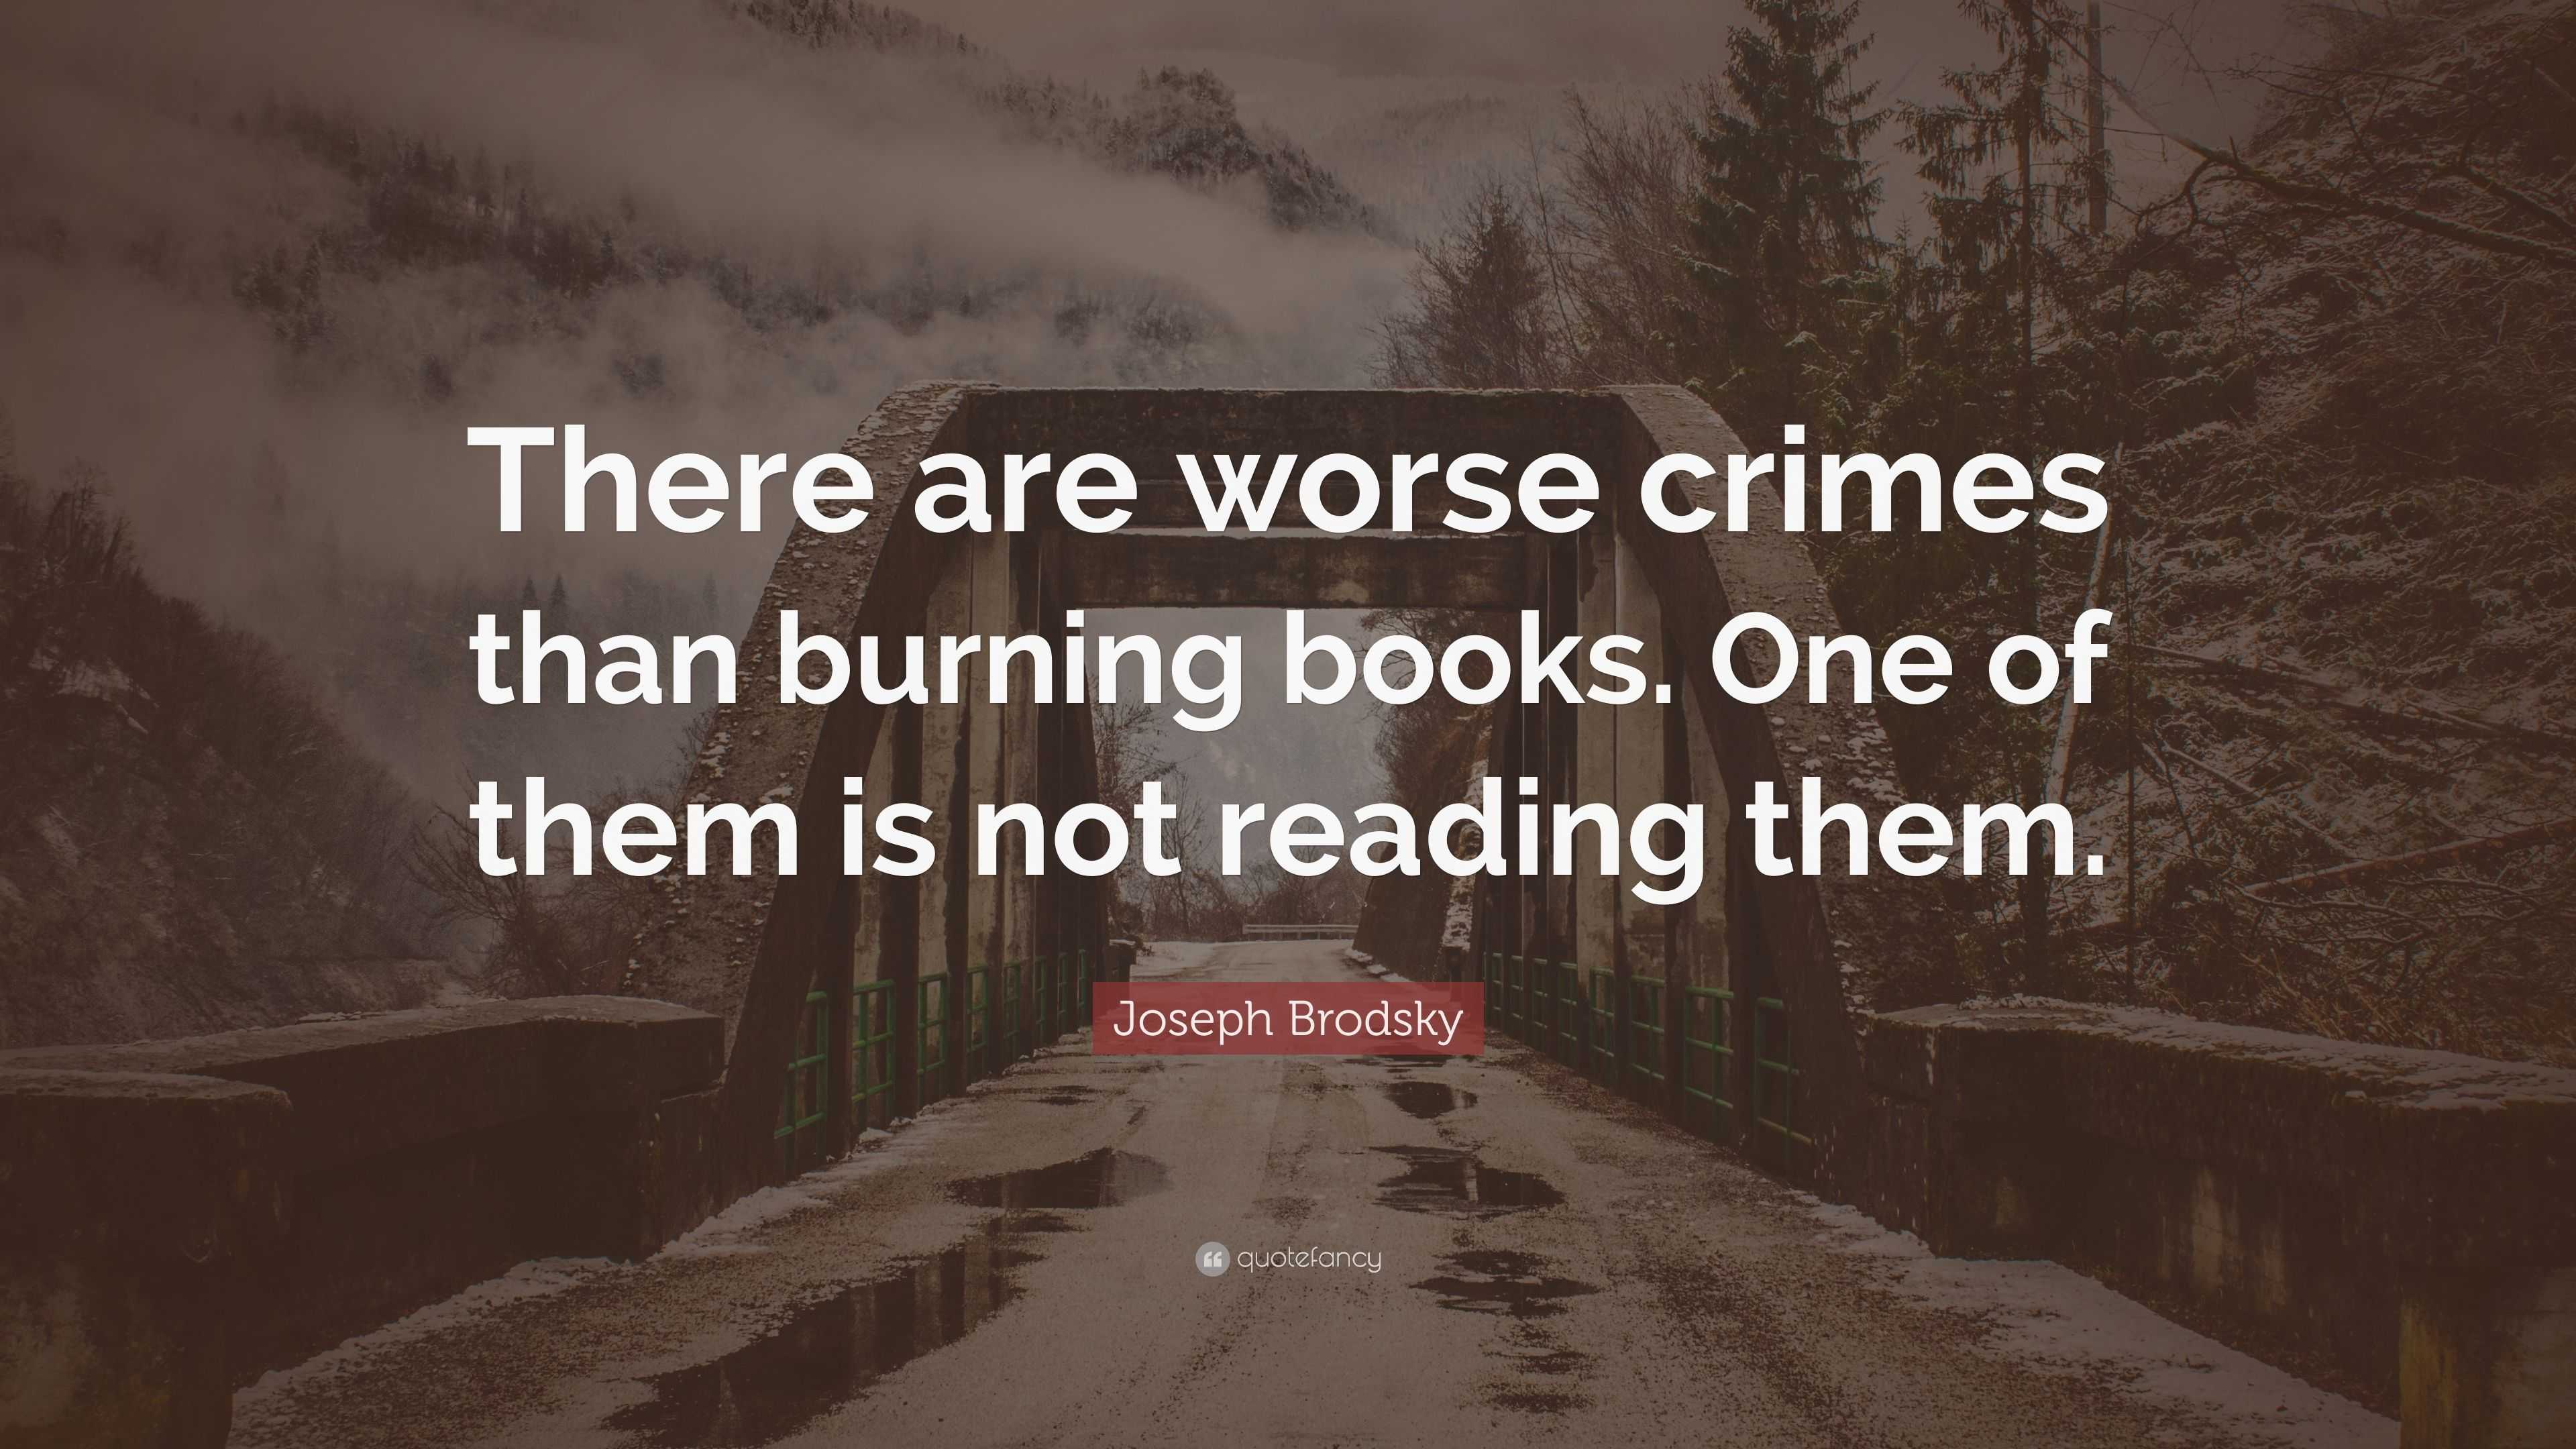 Joseph Brodsky Quote: “There are worse crimes than burning books. One